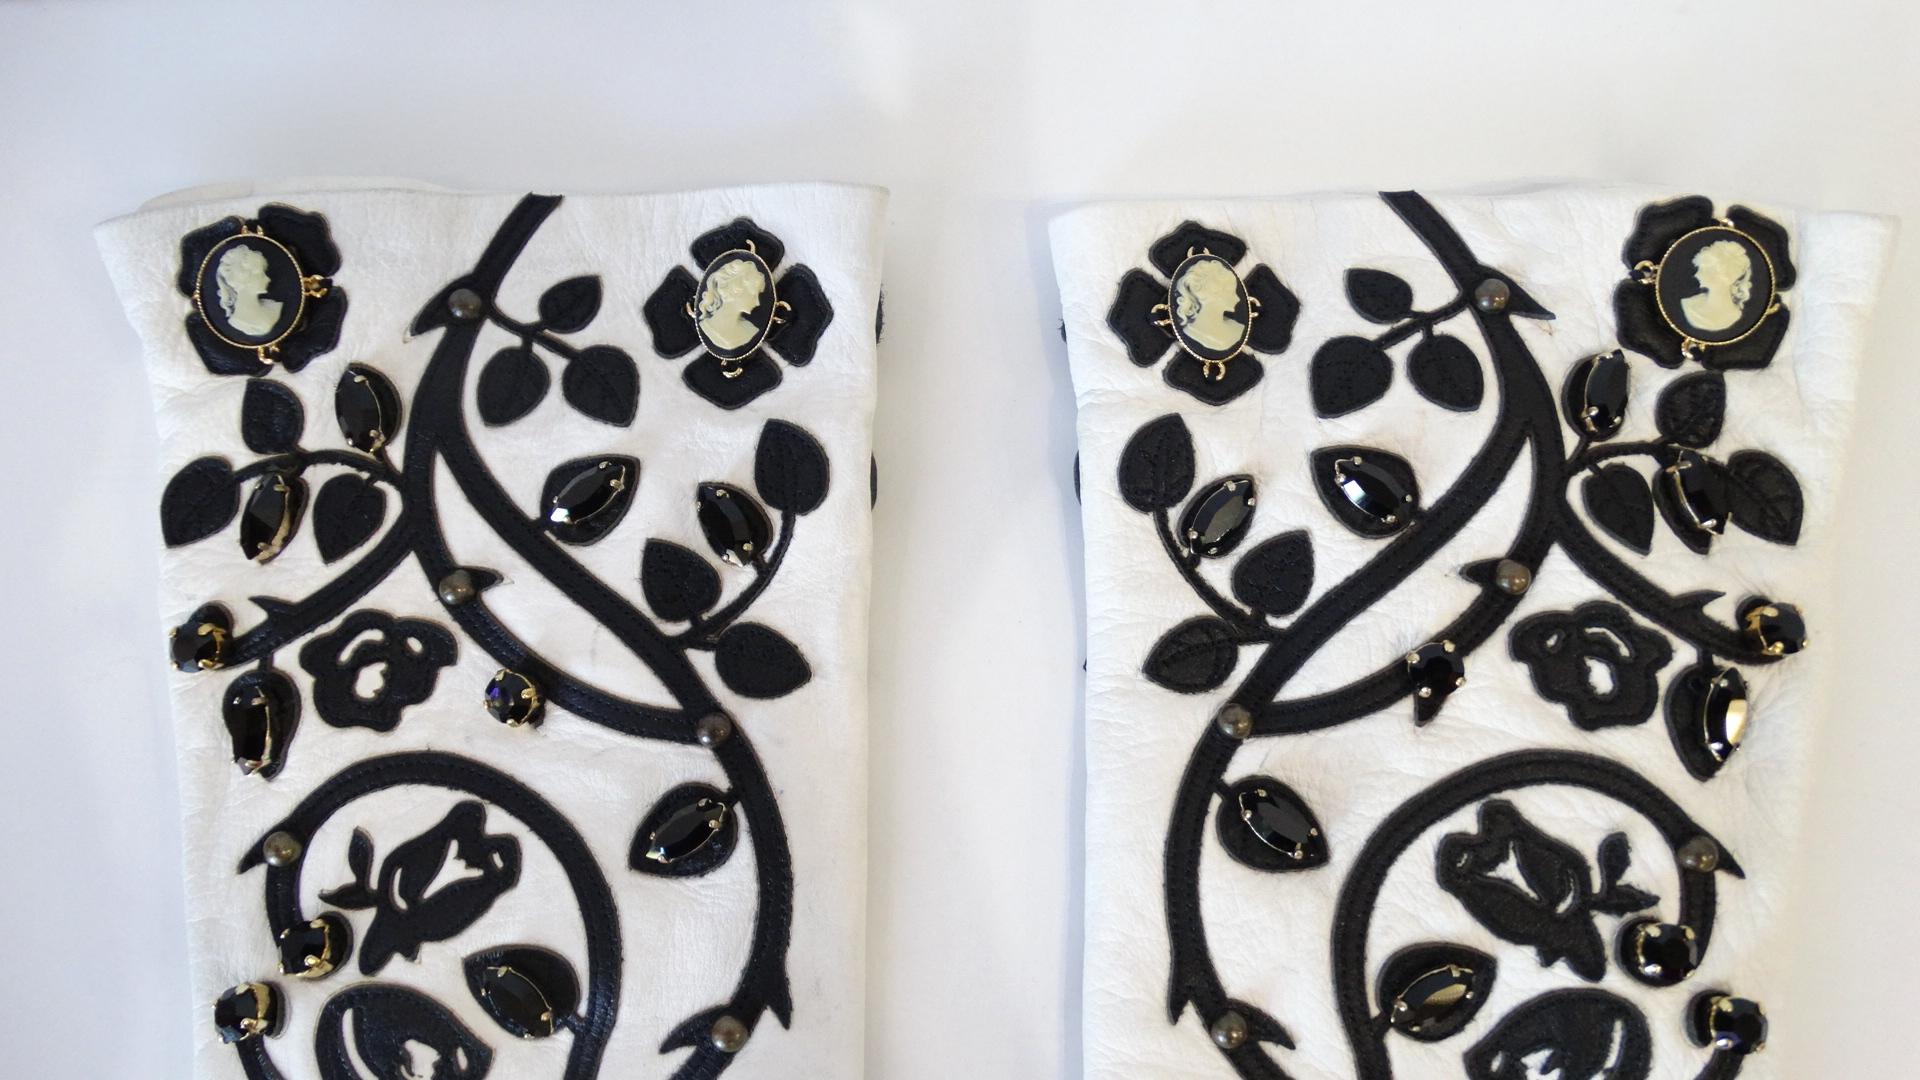 If You Don't Wear Gloves, Now Is The Time To Start! Circa 2000s, these white leather elbow gloves are limited edition from Dolce & Gabbana's mainline (runway) collection. They feature a gorgeous embroidered vinery pattern which is decorated with